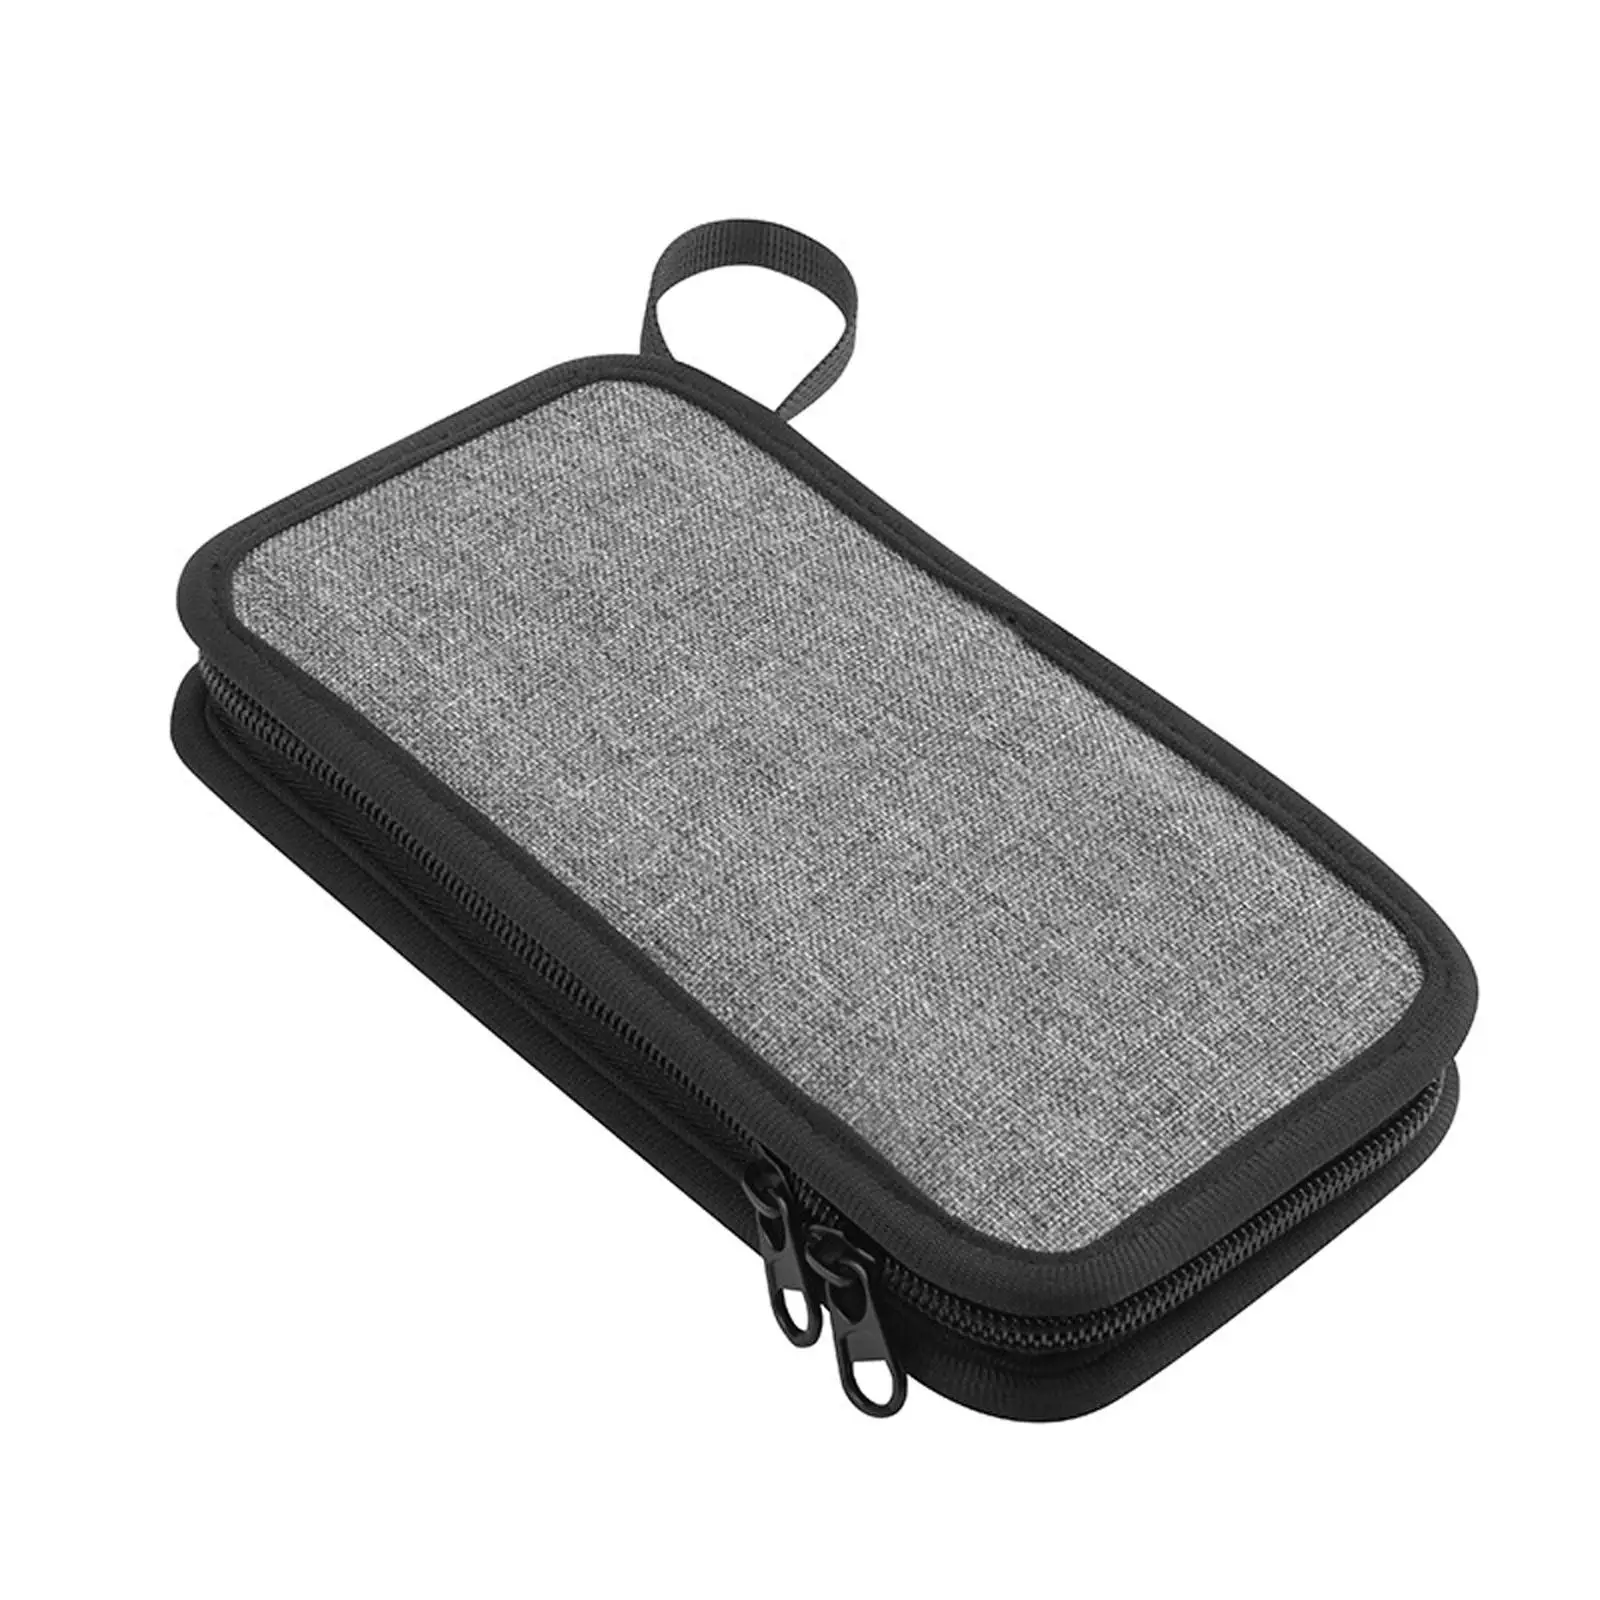 Game Card Carrying Case Wear Resistance Compact Portable Durable Game Card Travel Carry Case with 24 Games Slots Card Pouch Case